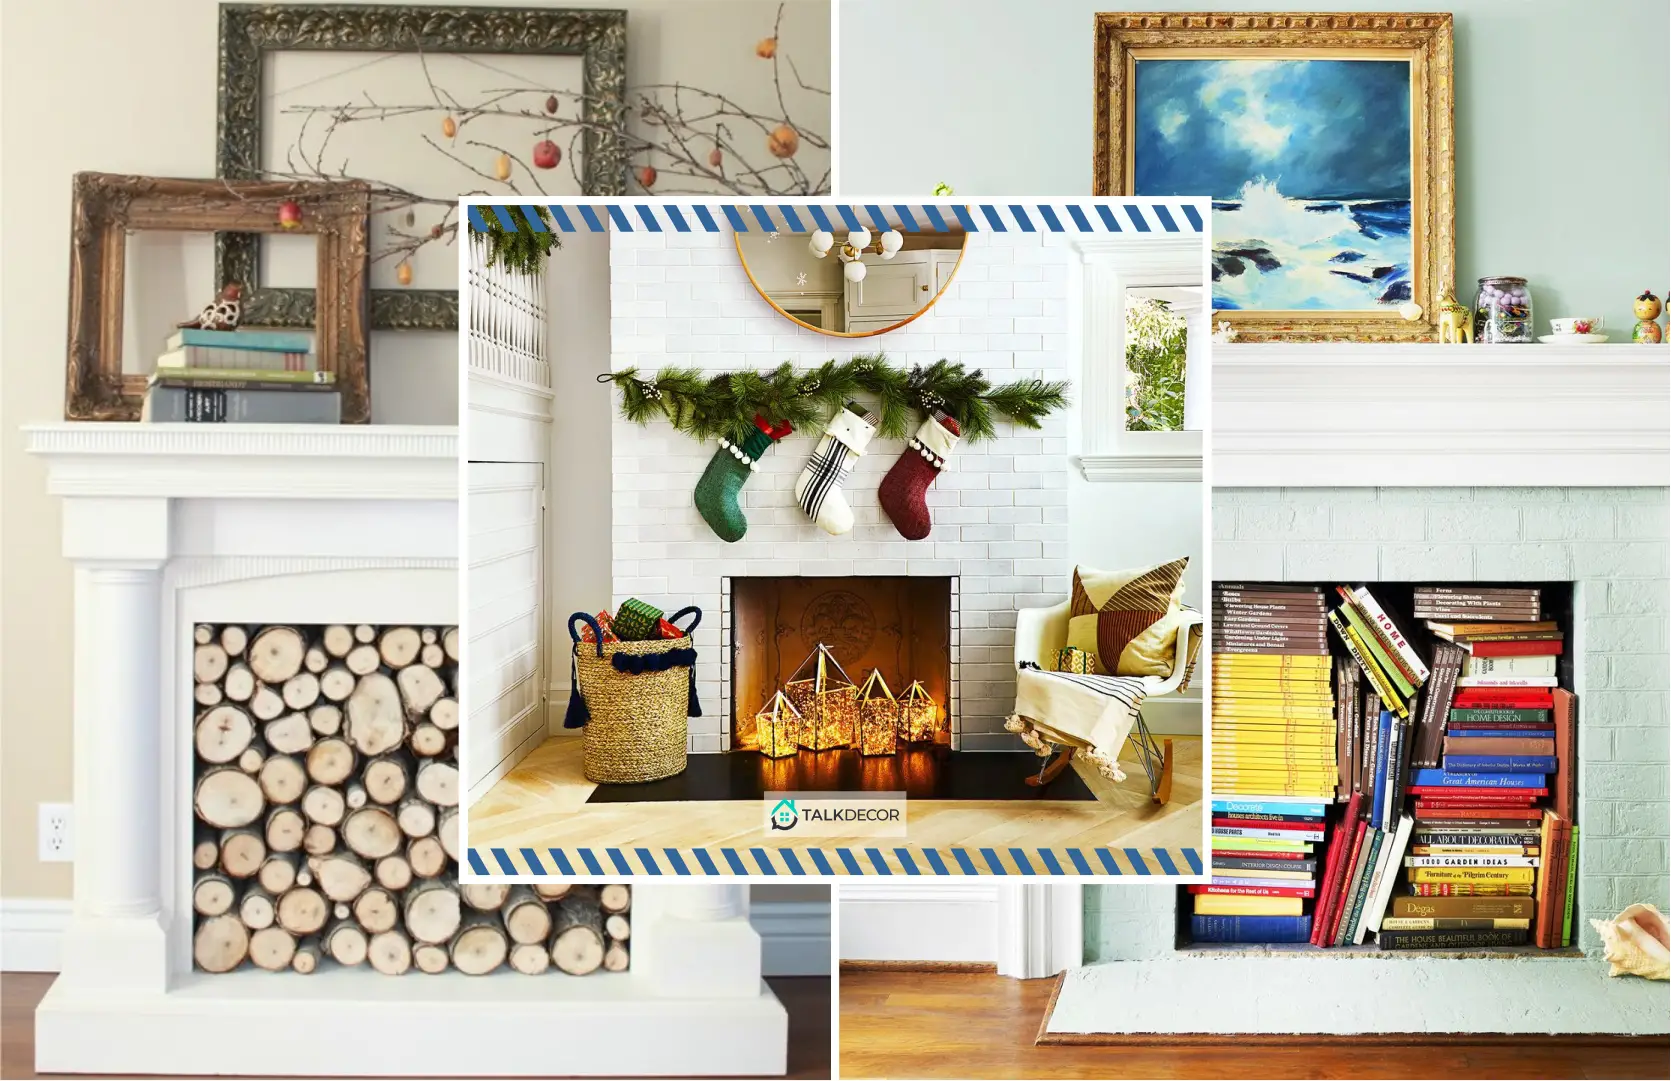 How to Apply Faux Fireplace for Home Decor Needs